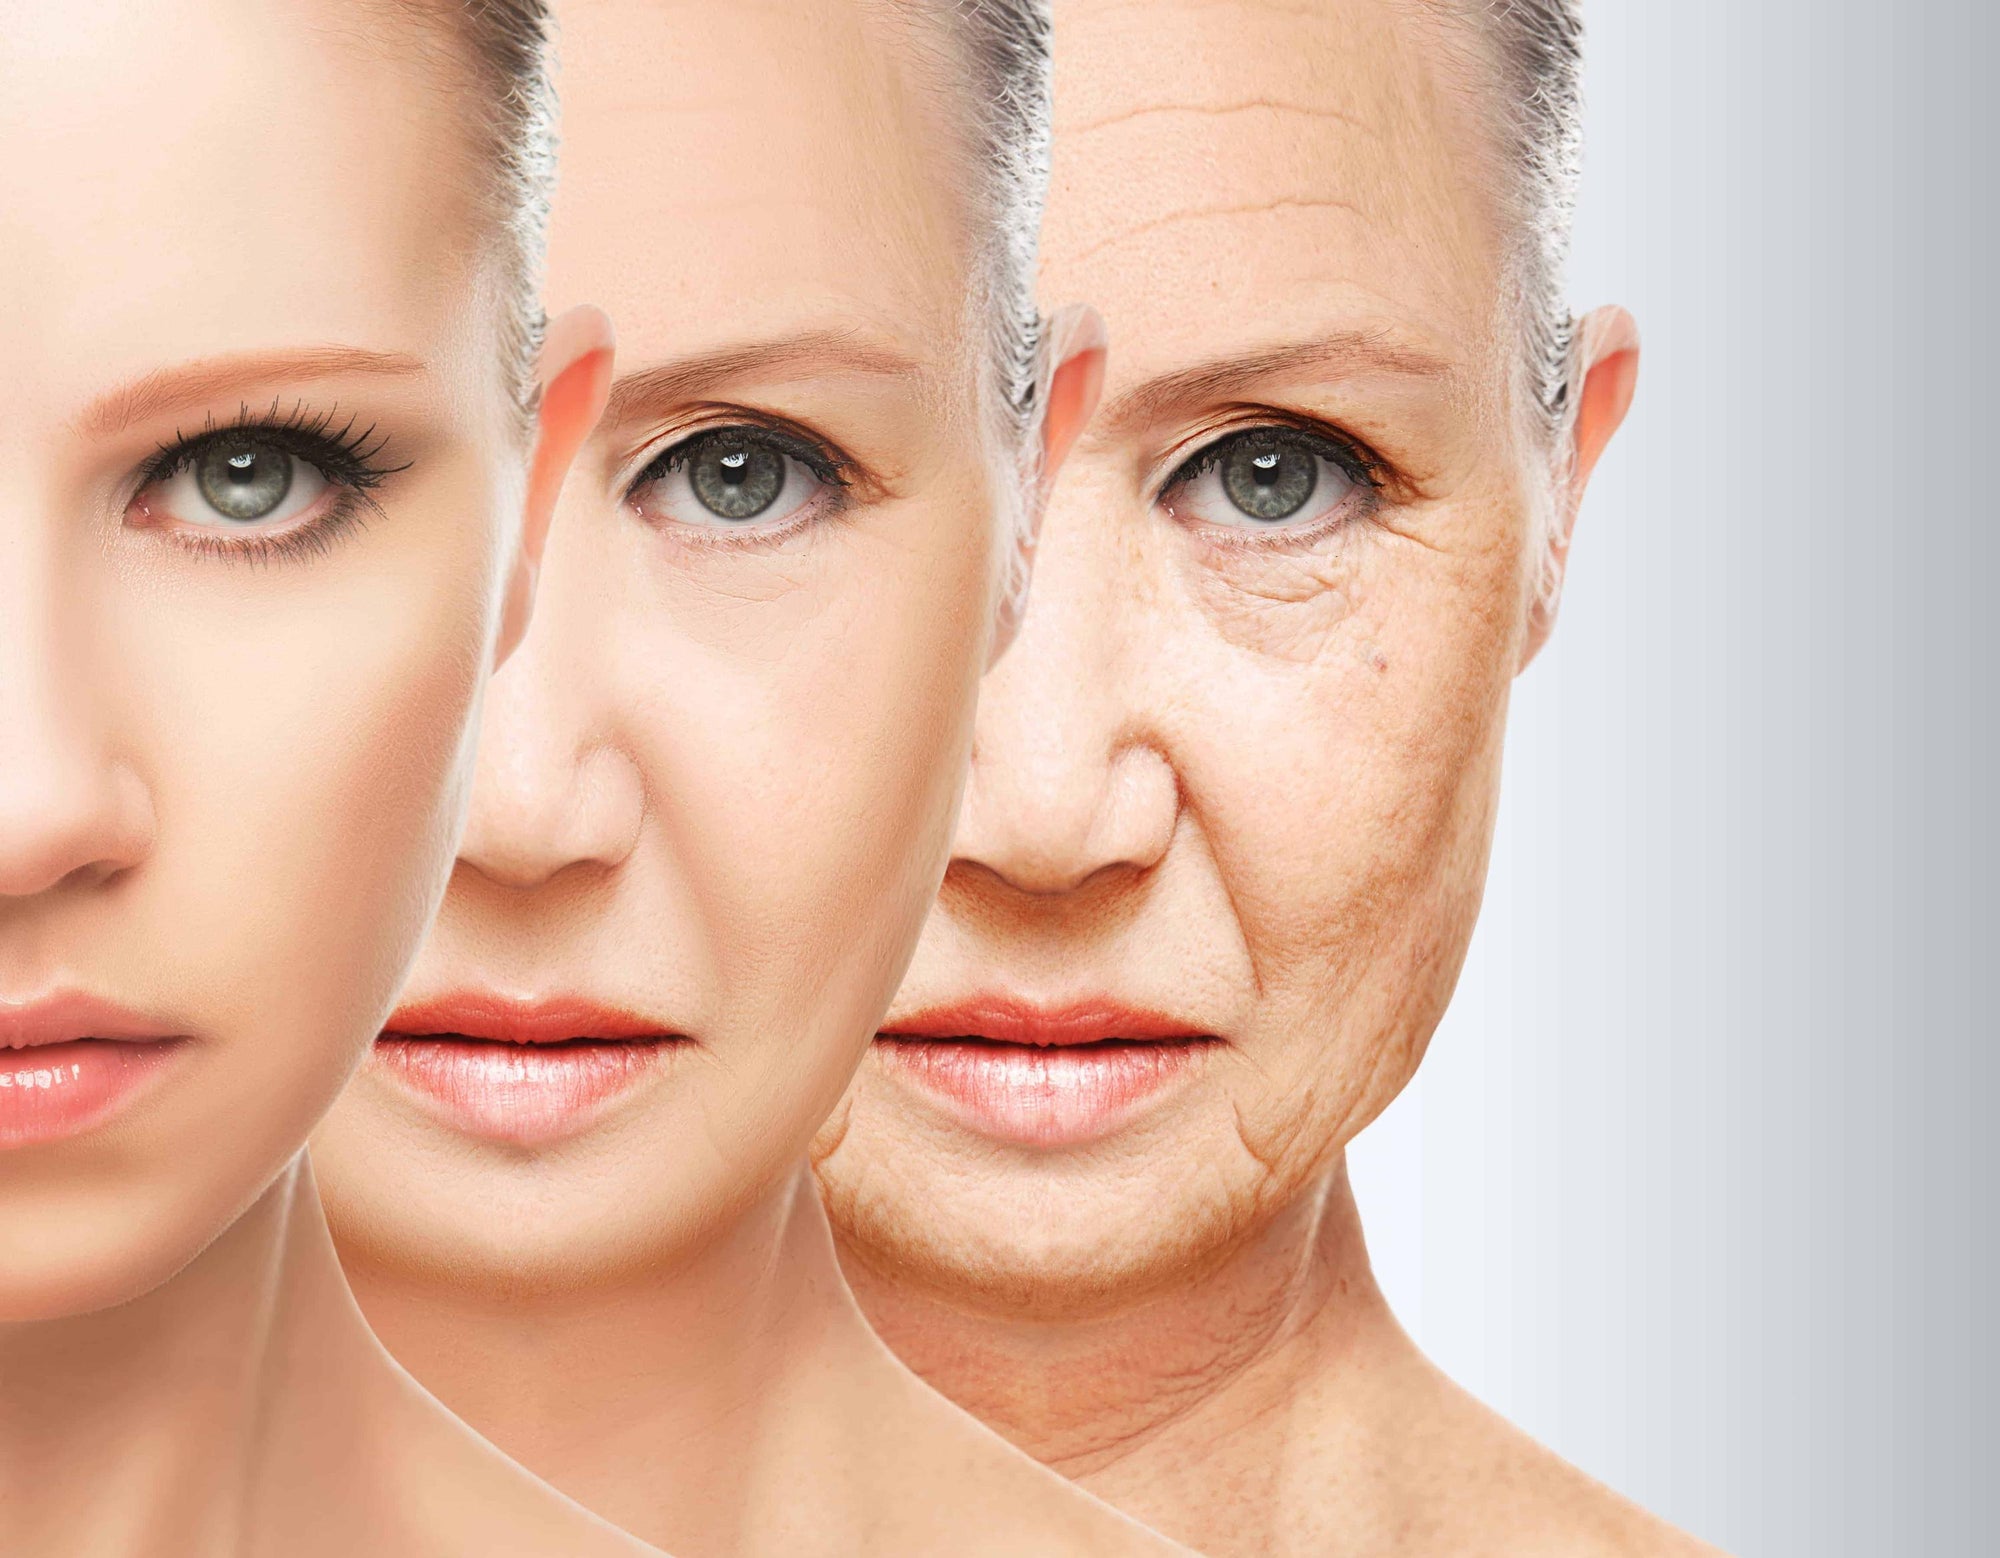 The basics of good skin care in your fifties